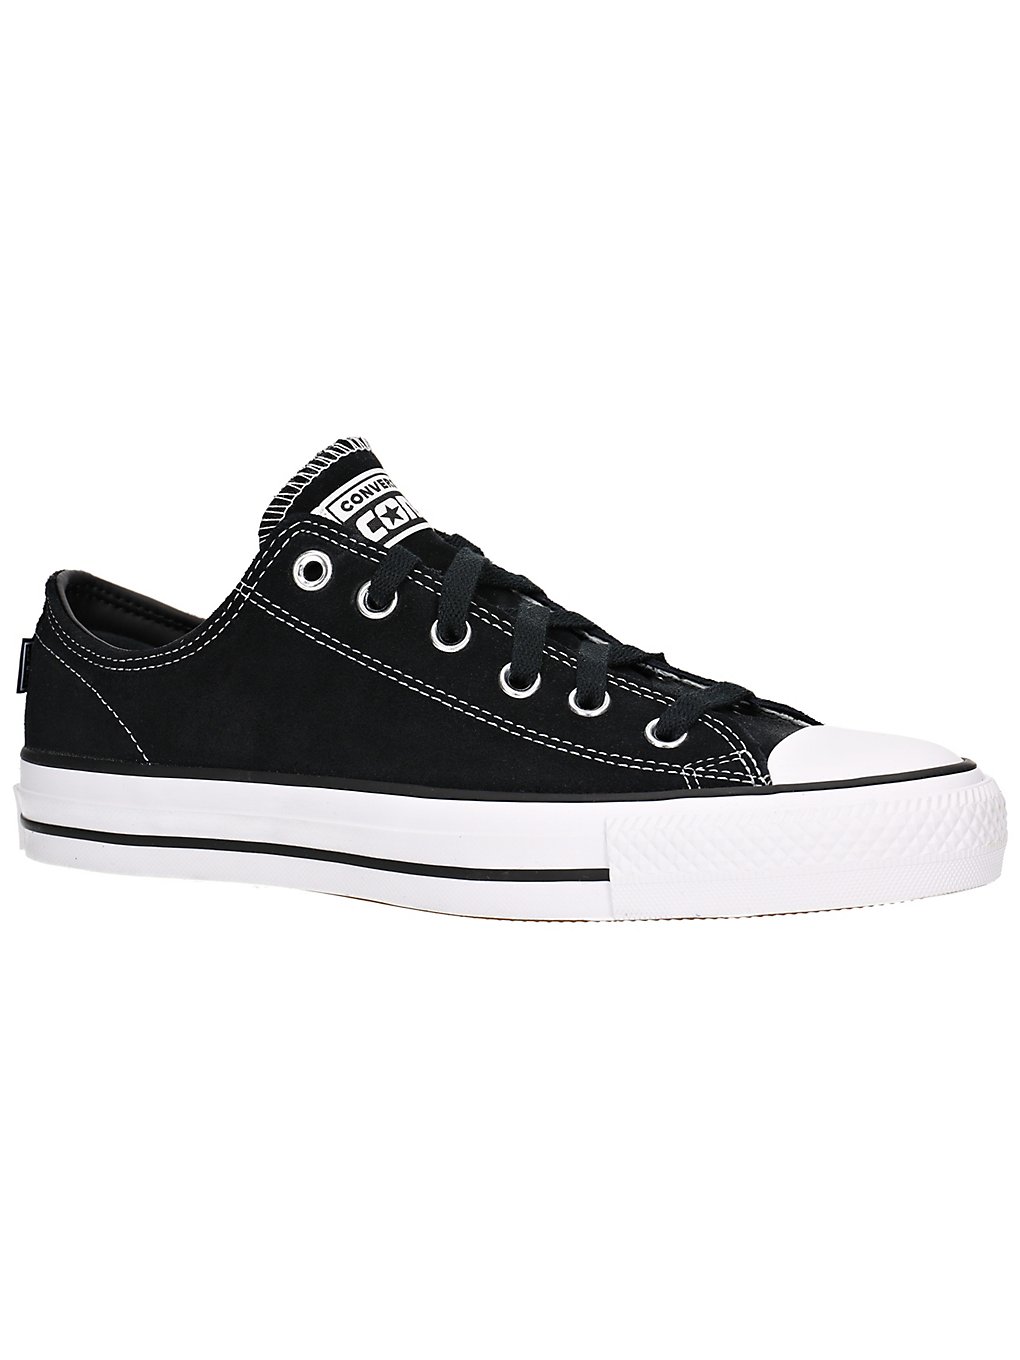 Converse Cons Chuck Taylor All Star Pro Suede Skate Shoes black/black/white